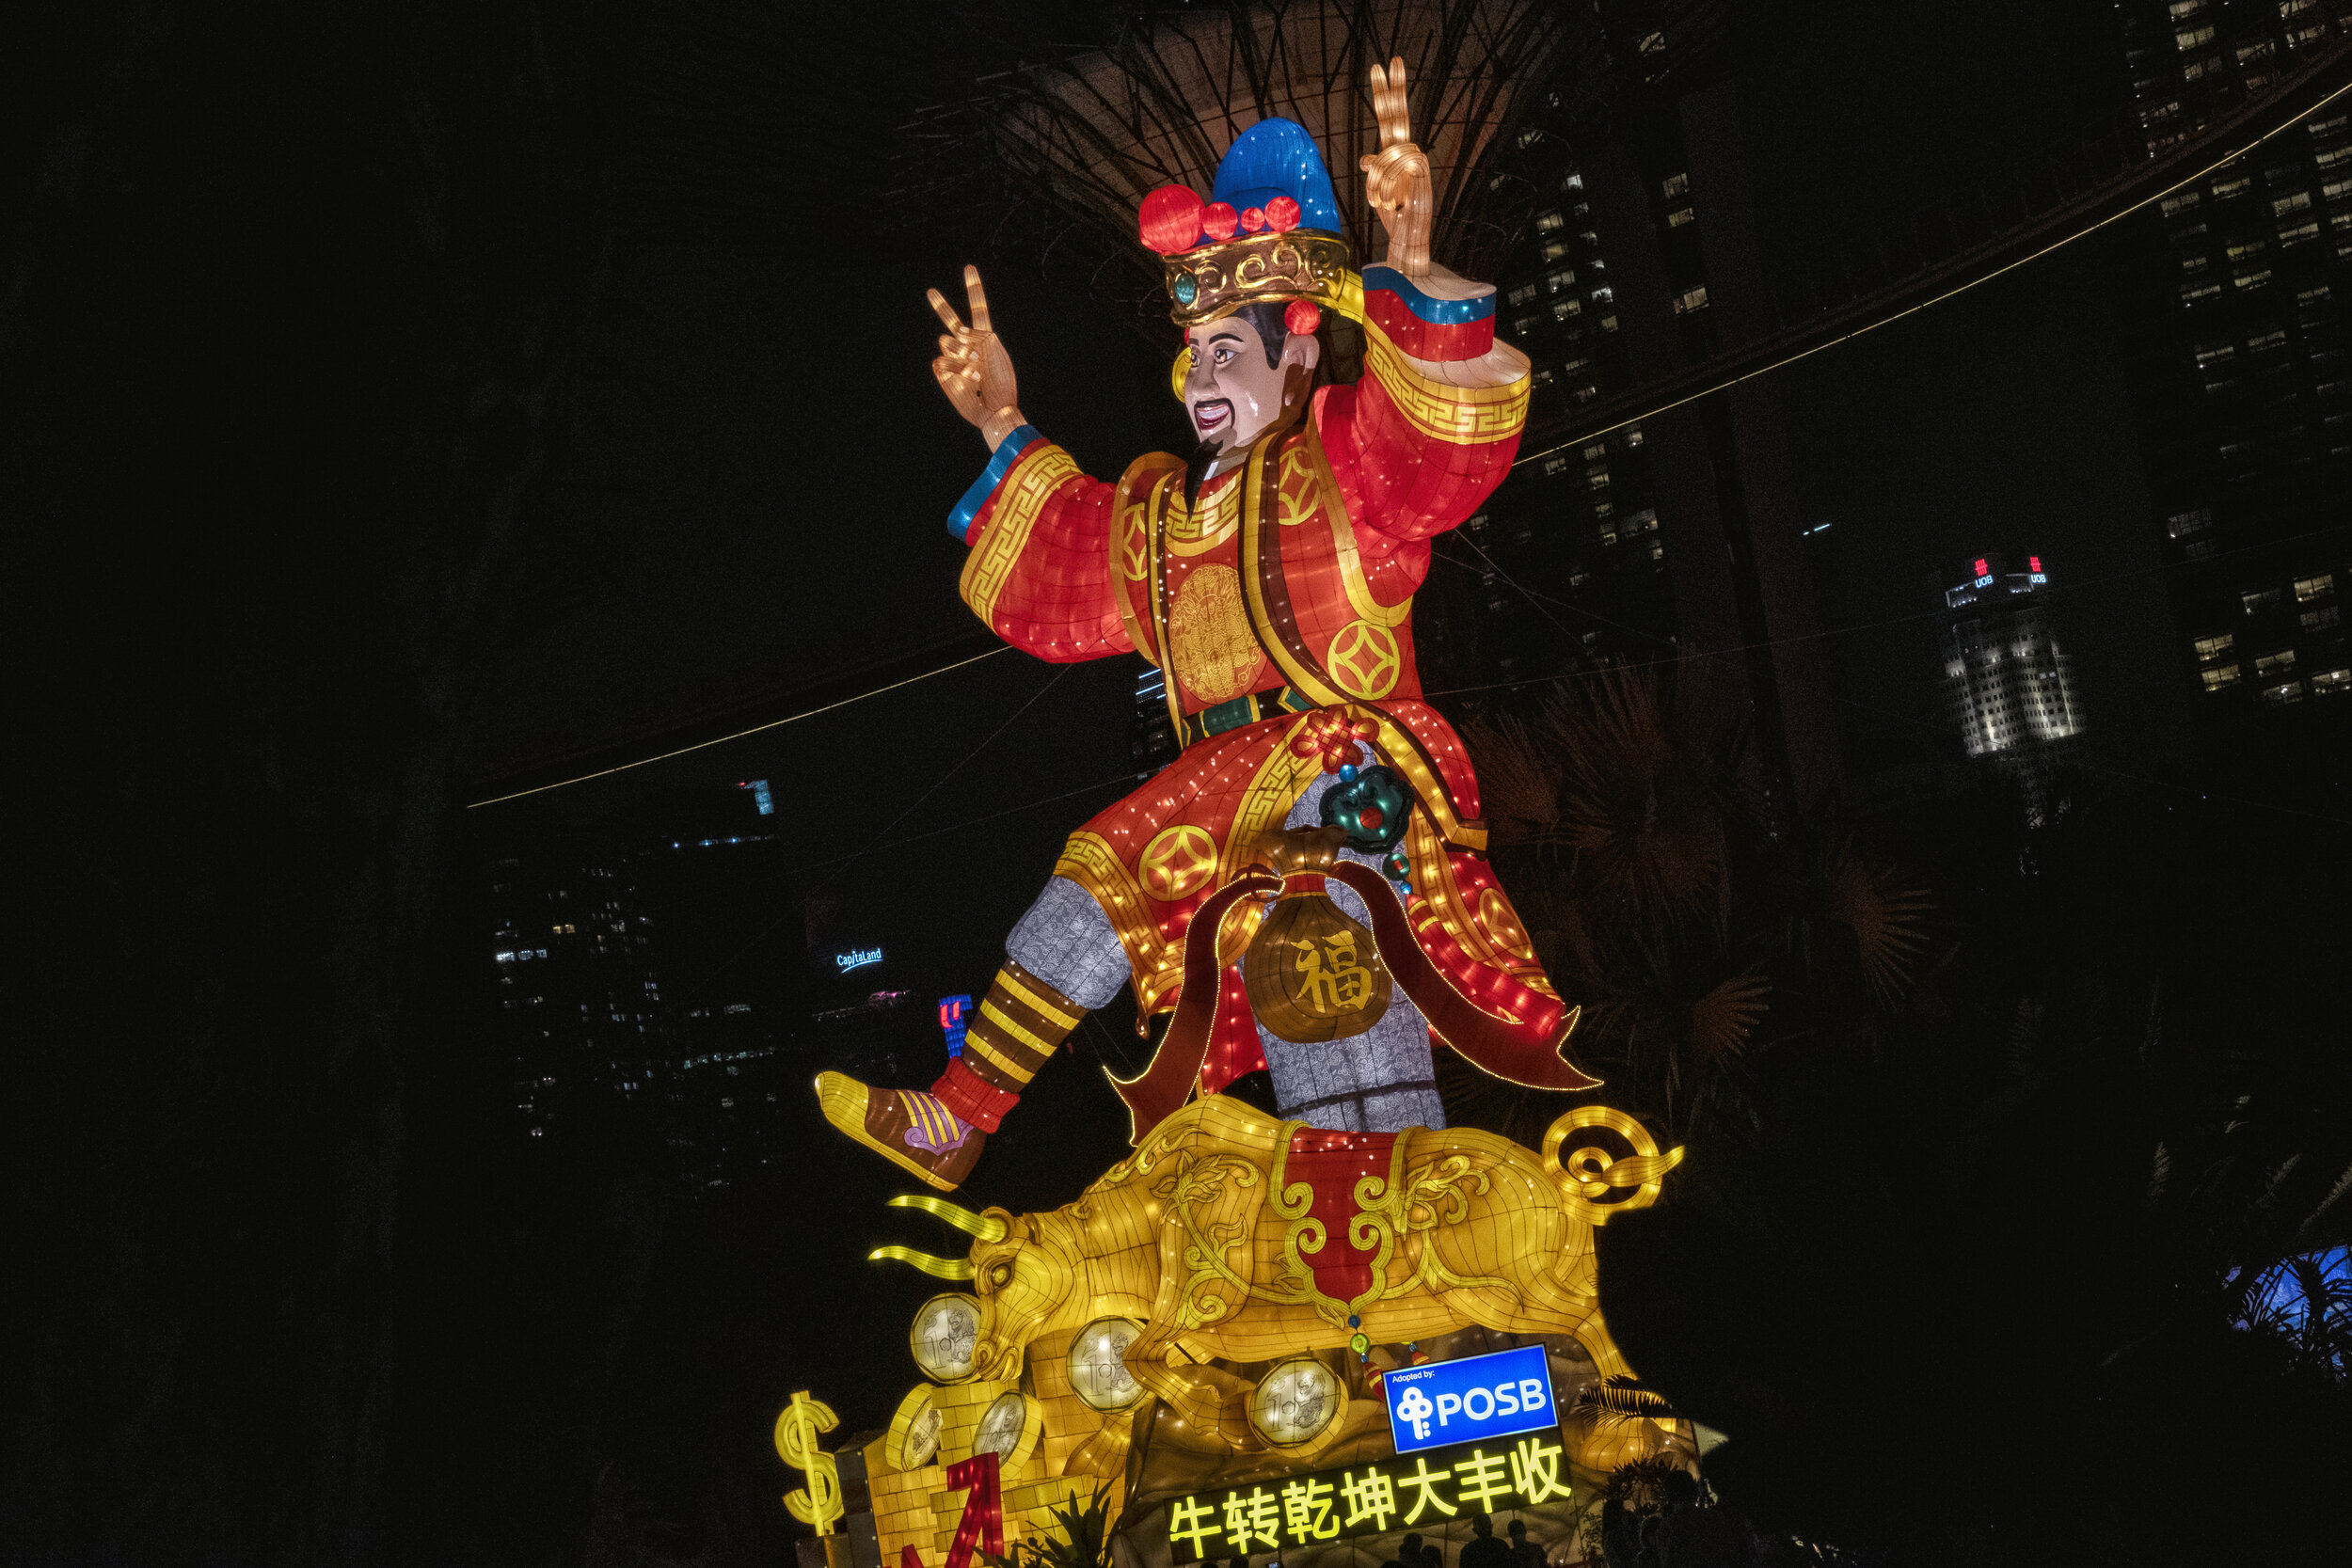  A giant lantern depicting Caishen, the god of fortune, money and a golden ox is seen during the annual River Hongbao festival on the eve of the Chinese Lunar New Year of the Ox, otherwise known as the Spring Festival, at Singapore's Gardens by the B